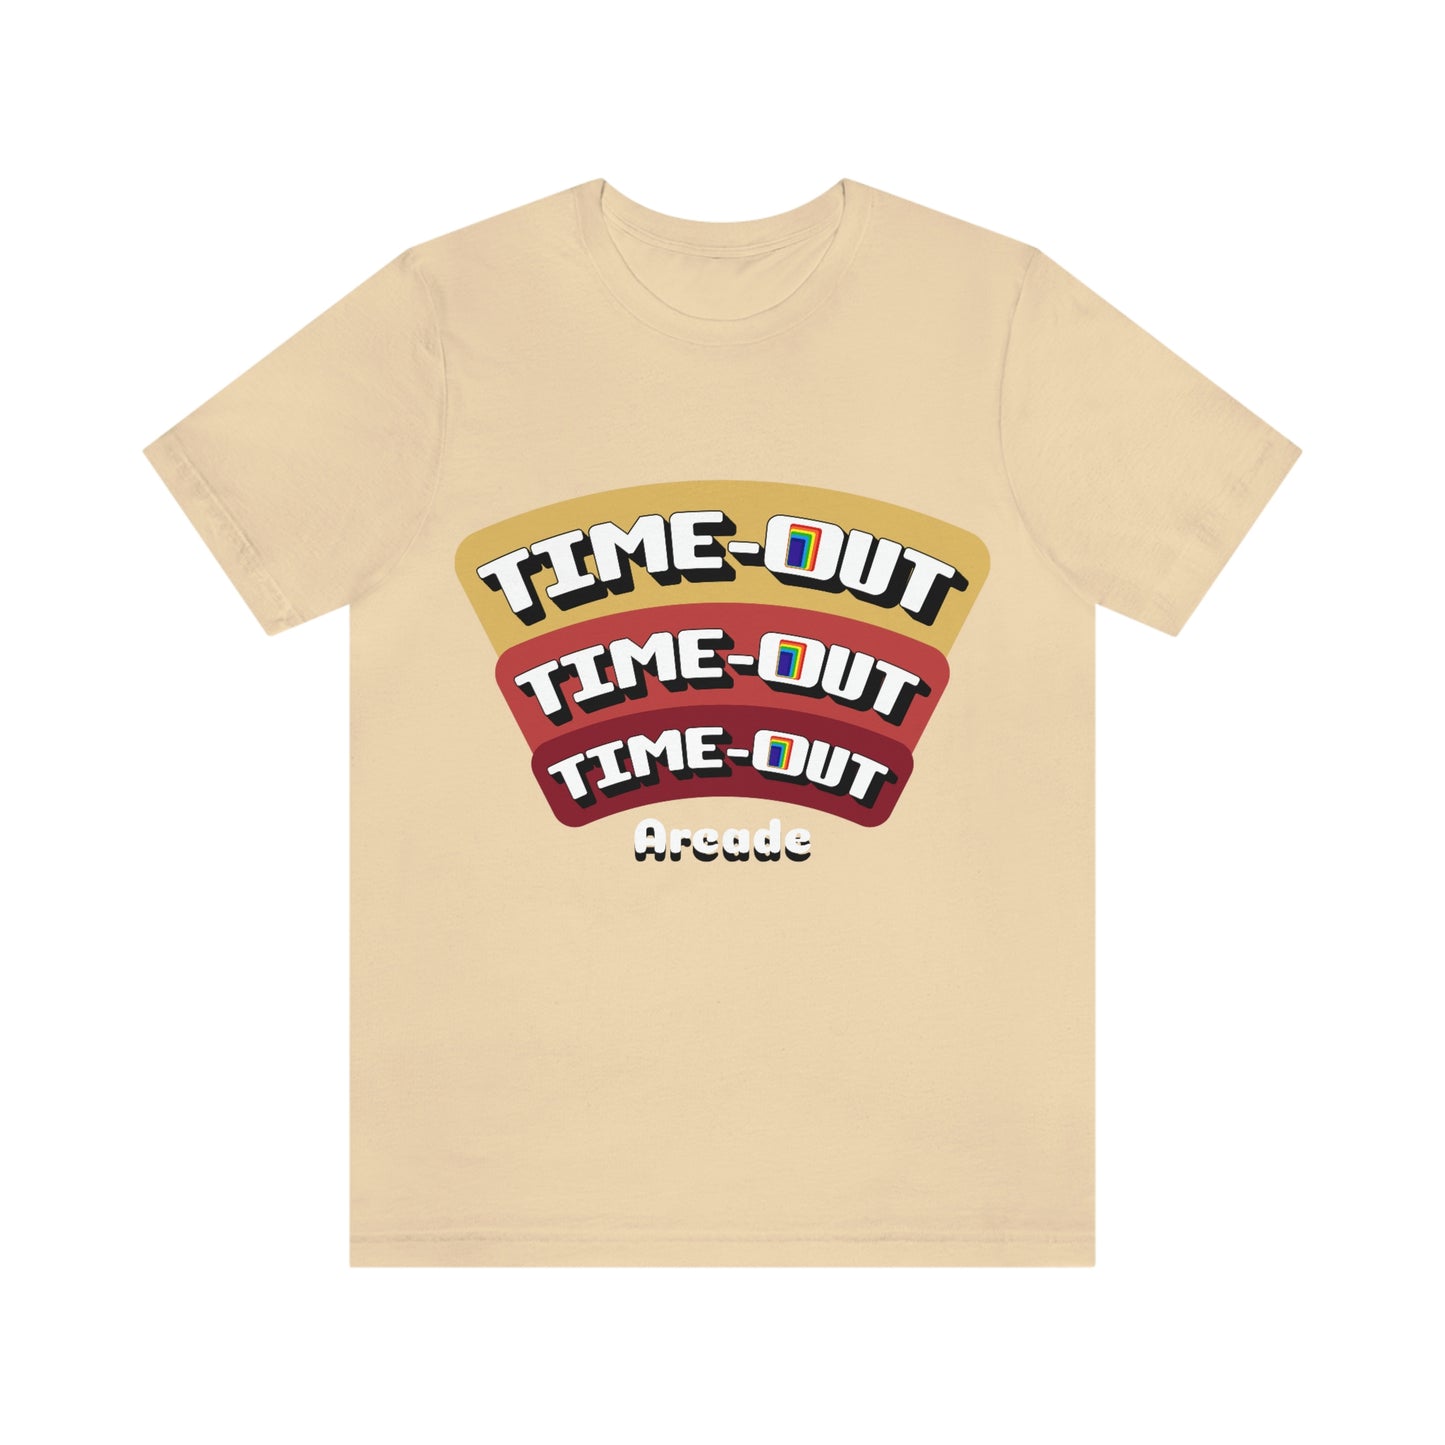 Time-Out Mall Arcade Retro 70's 80's 90's Gaming Teen Hangout T-Shirt